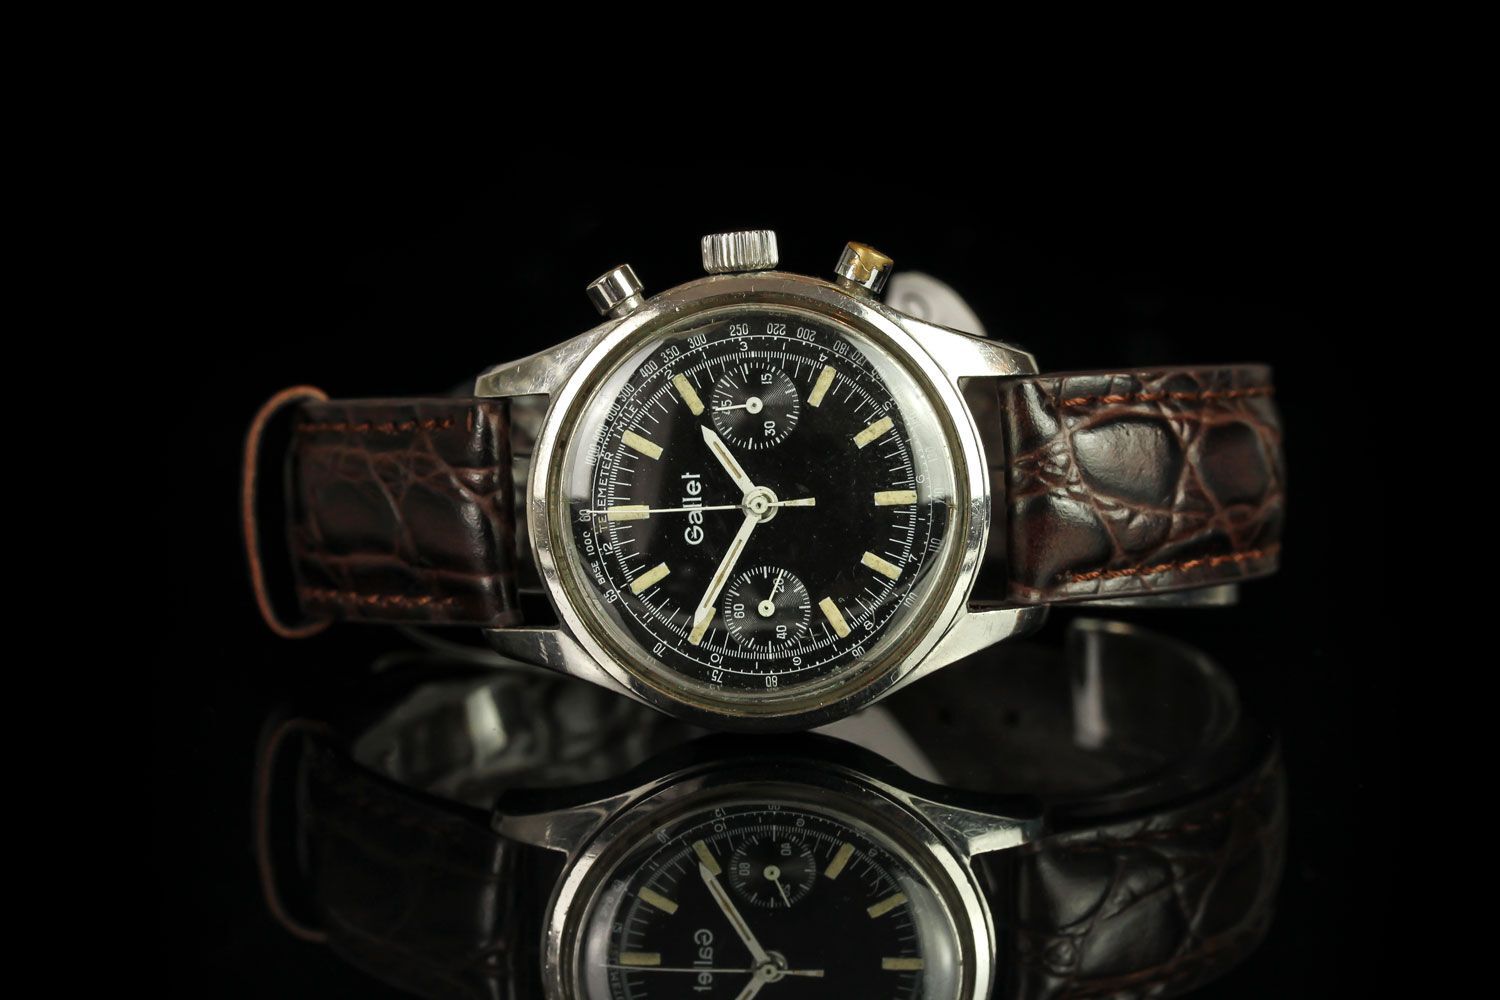 GENTLEMENS GALLET CHRONOGRAPH WRISTWATCH, circular black twin register dial with an outer tachymeter